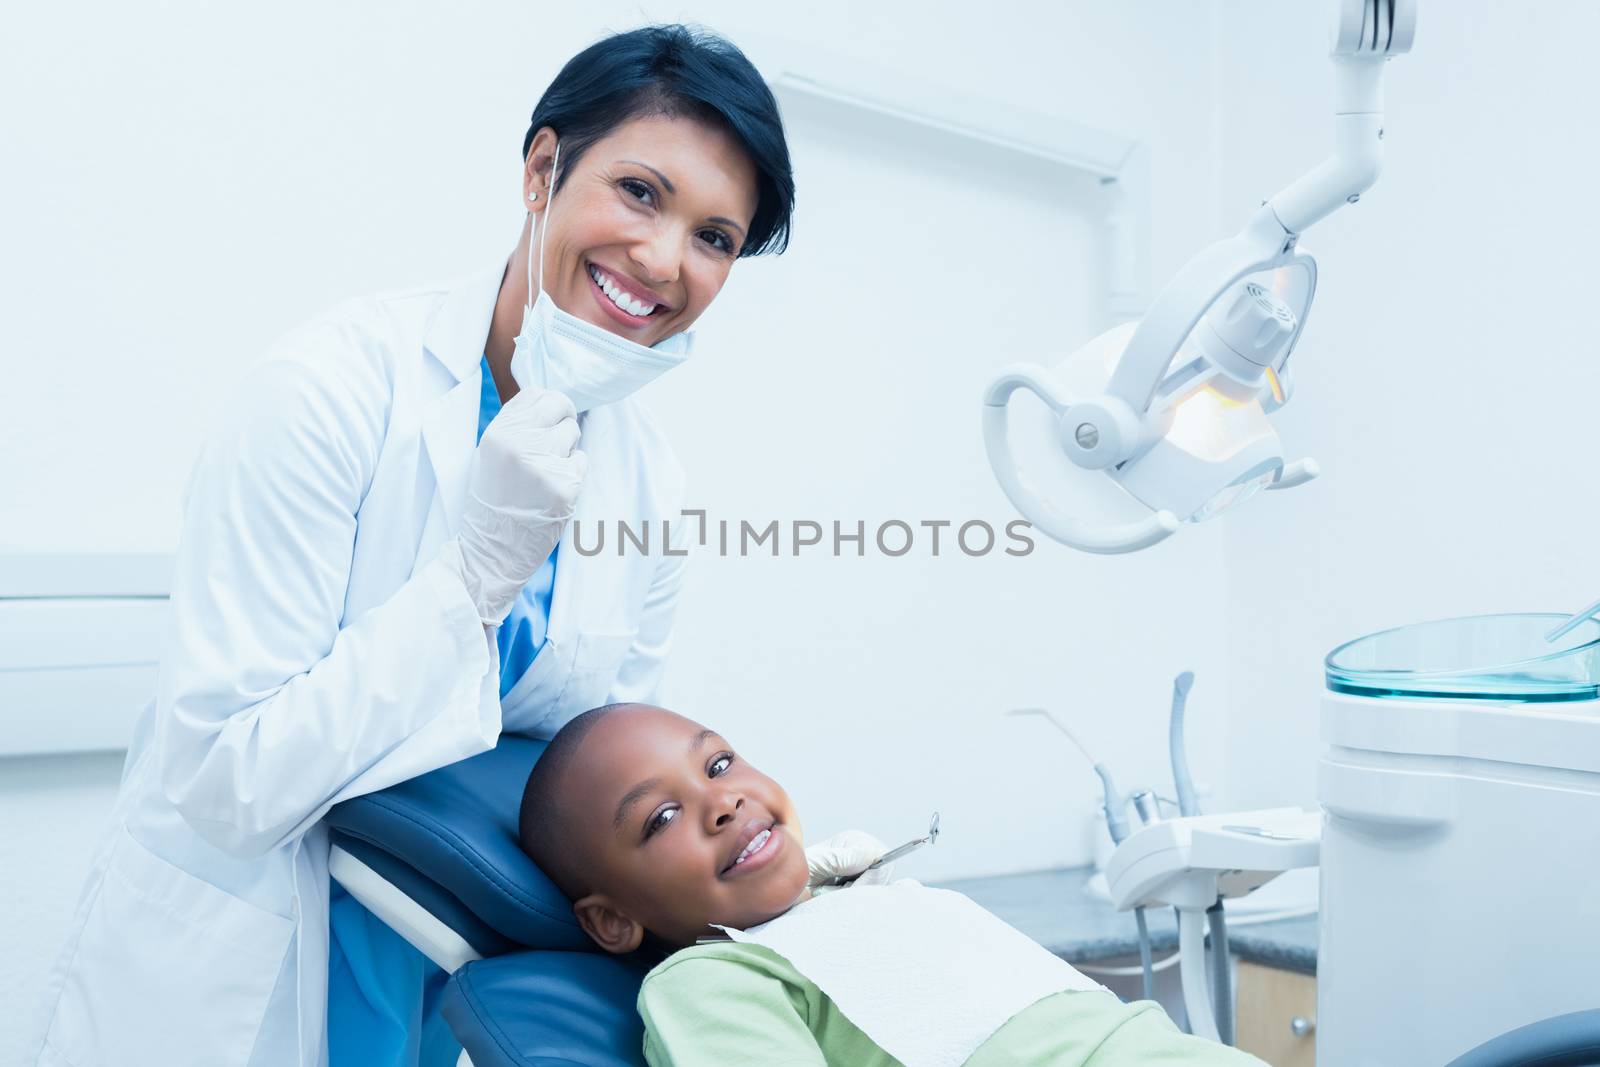 Portrait of smiling female dentist examining boys teeth in the dentists chair